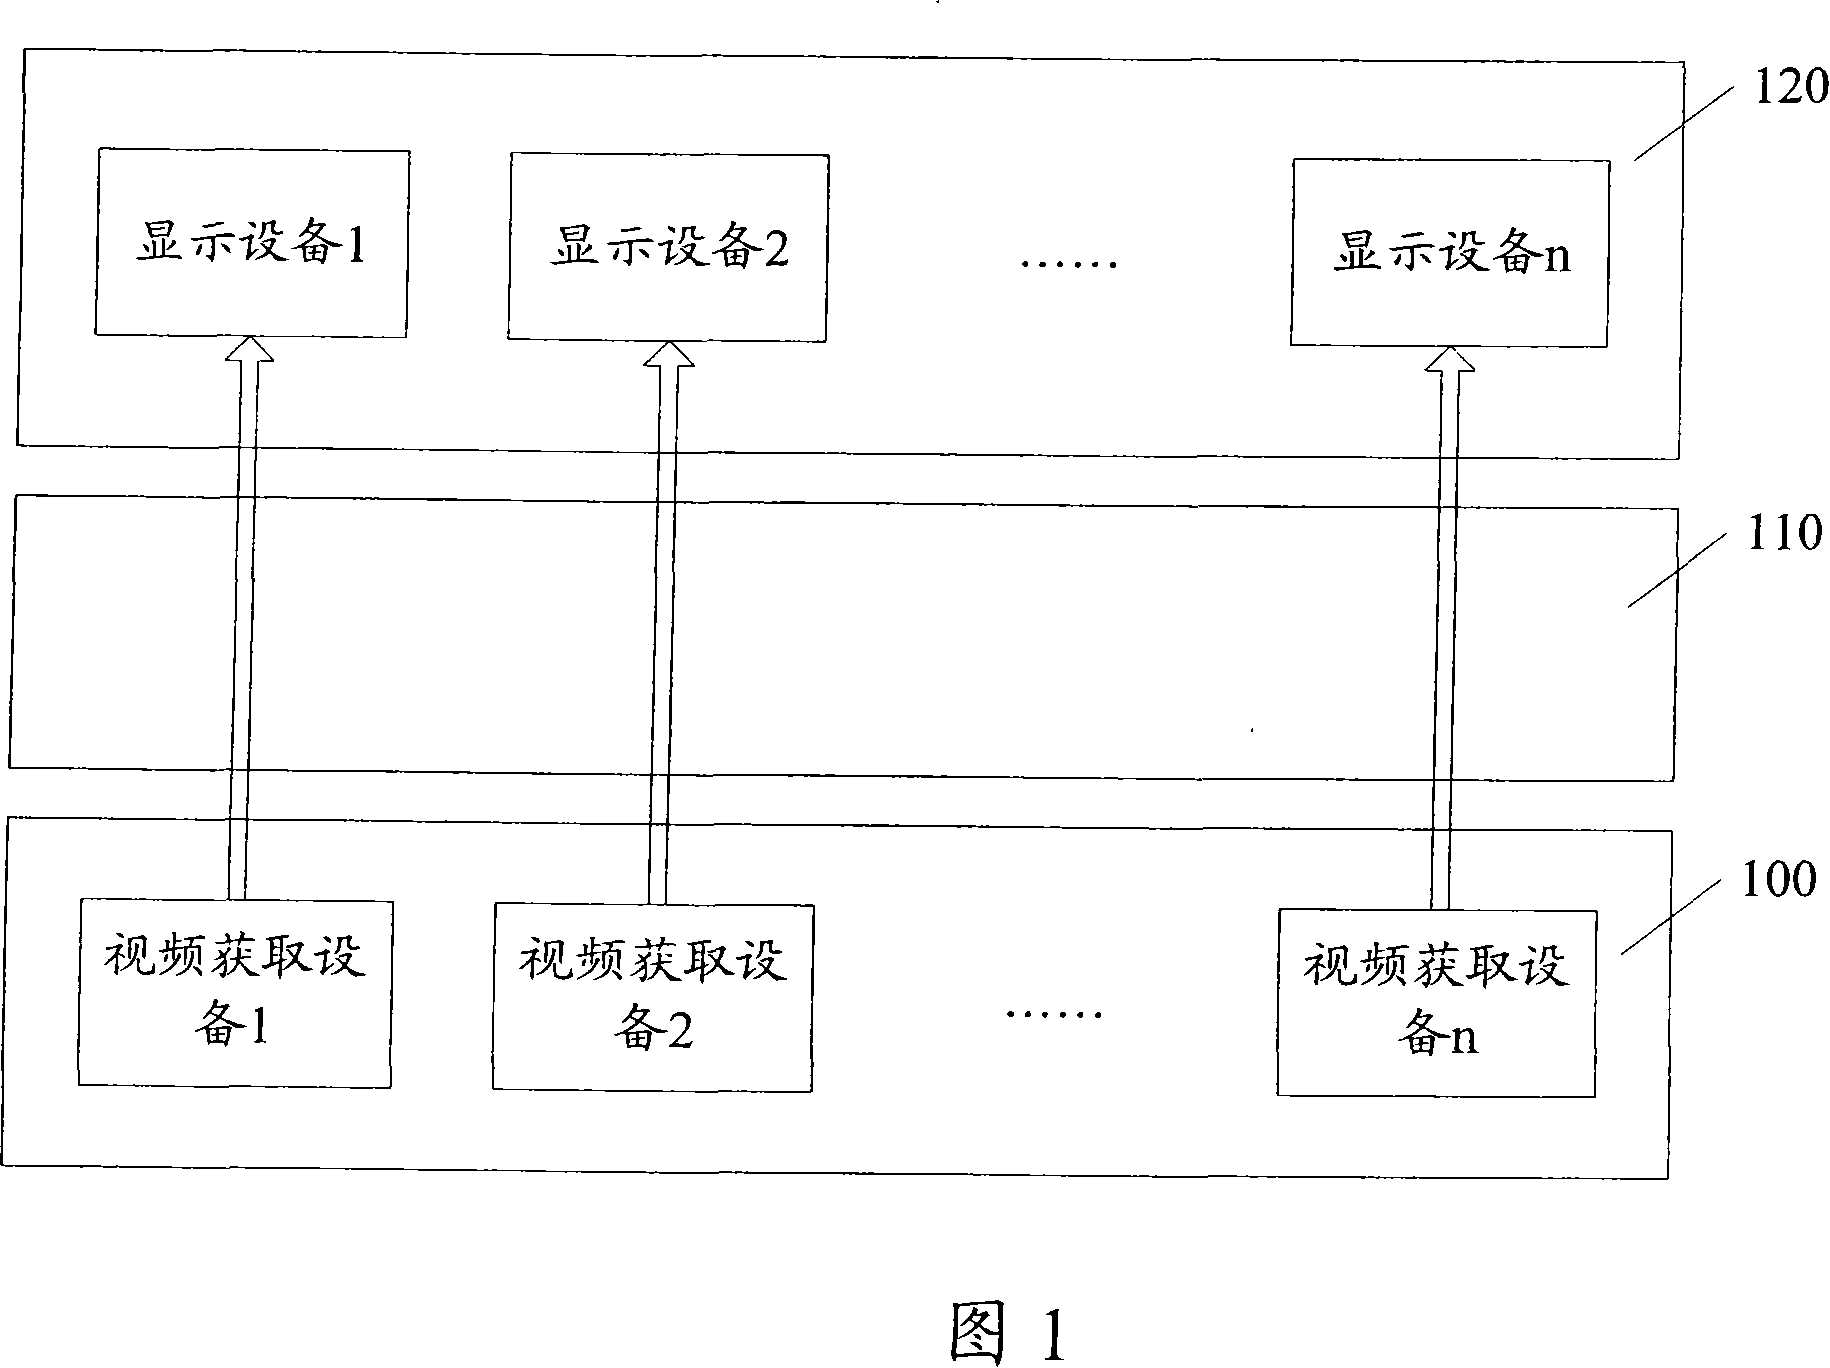 Multi-channel video signal transmission and TV wall display method, system and processing device